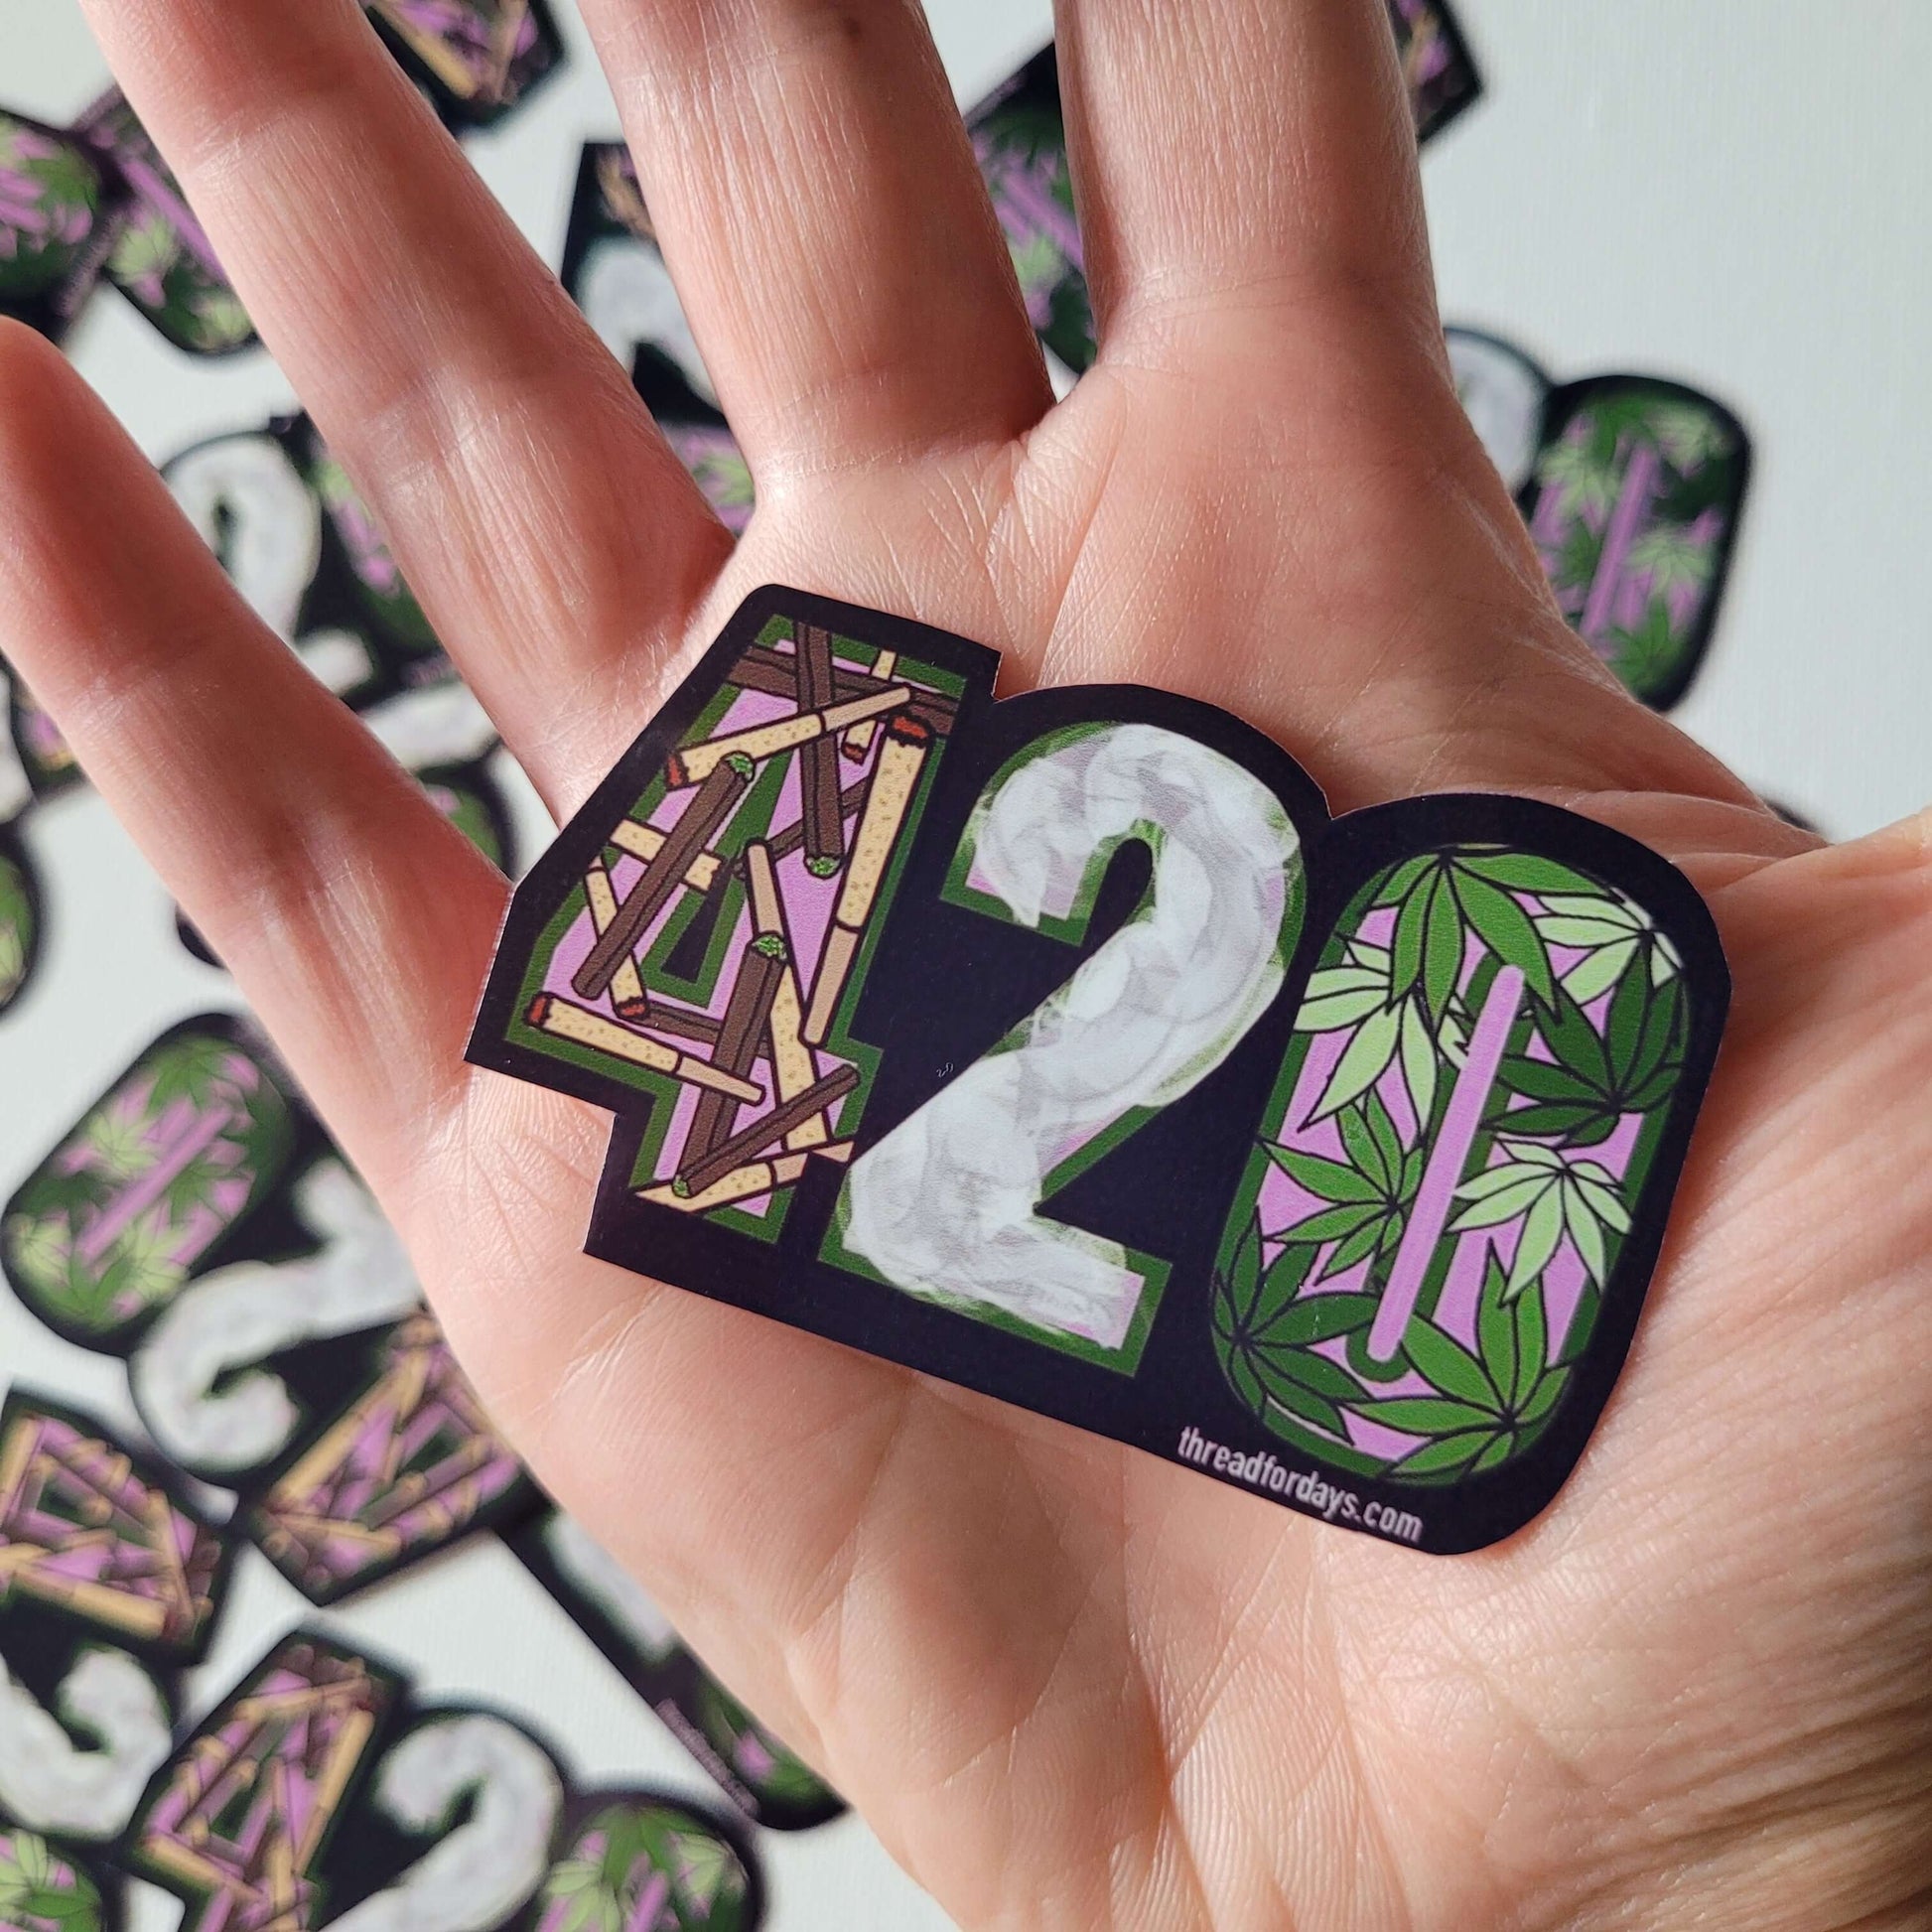 420 sticker in palm of hand for sizing